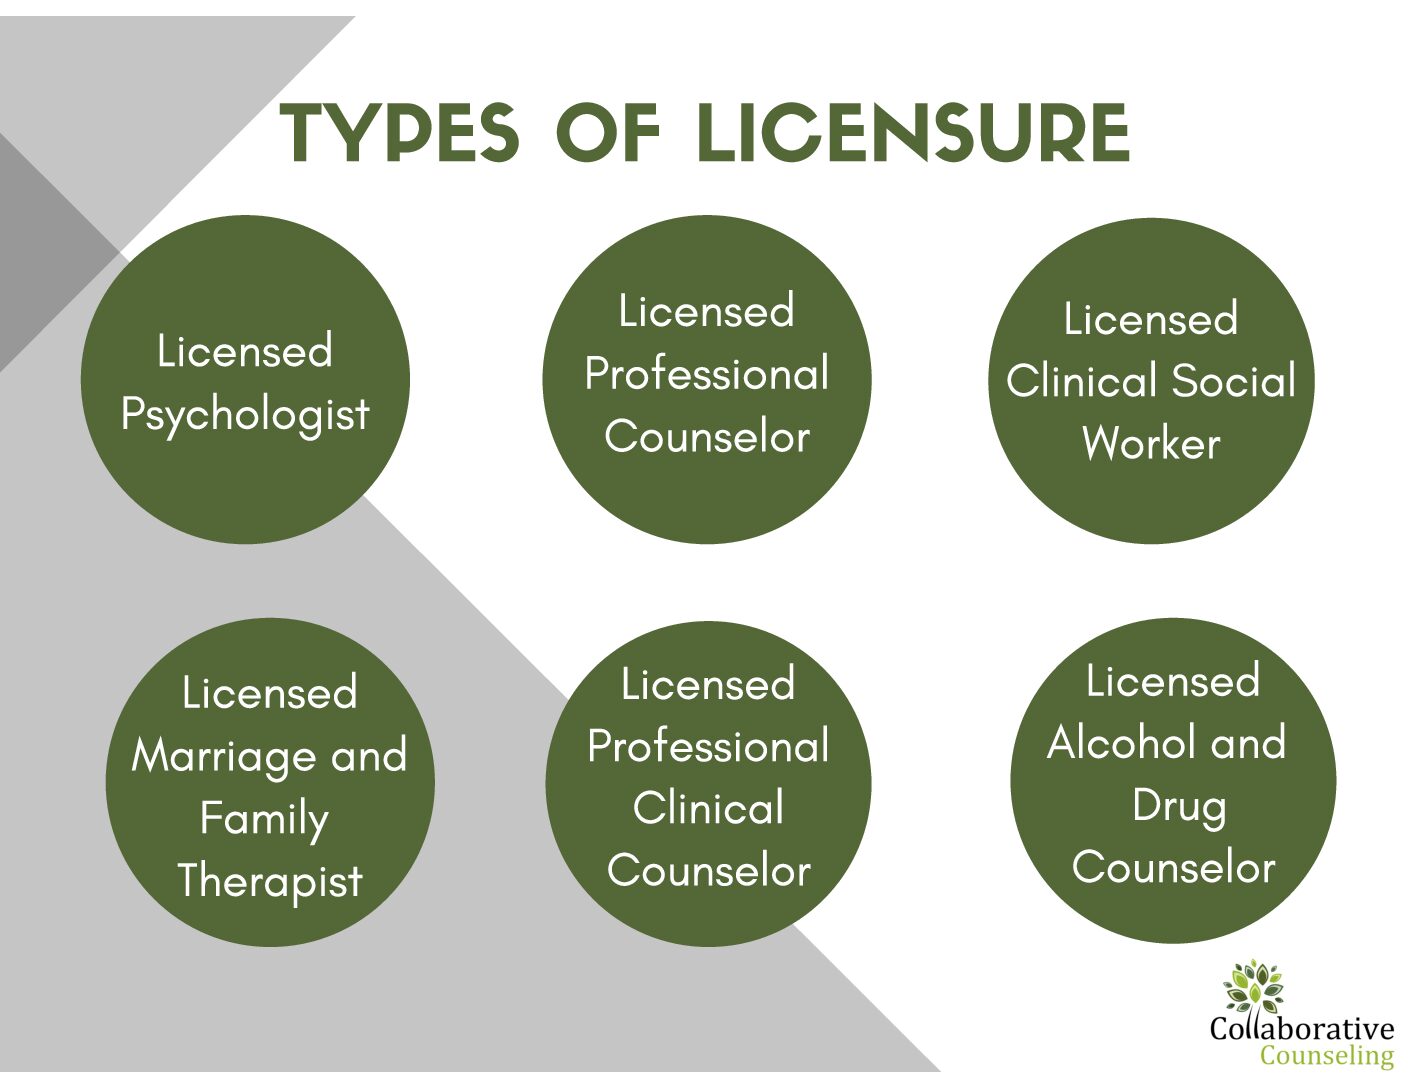 Types of licensure